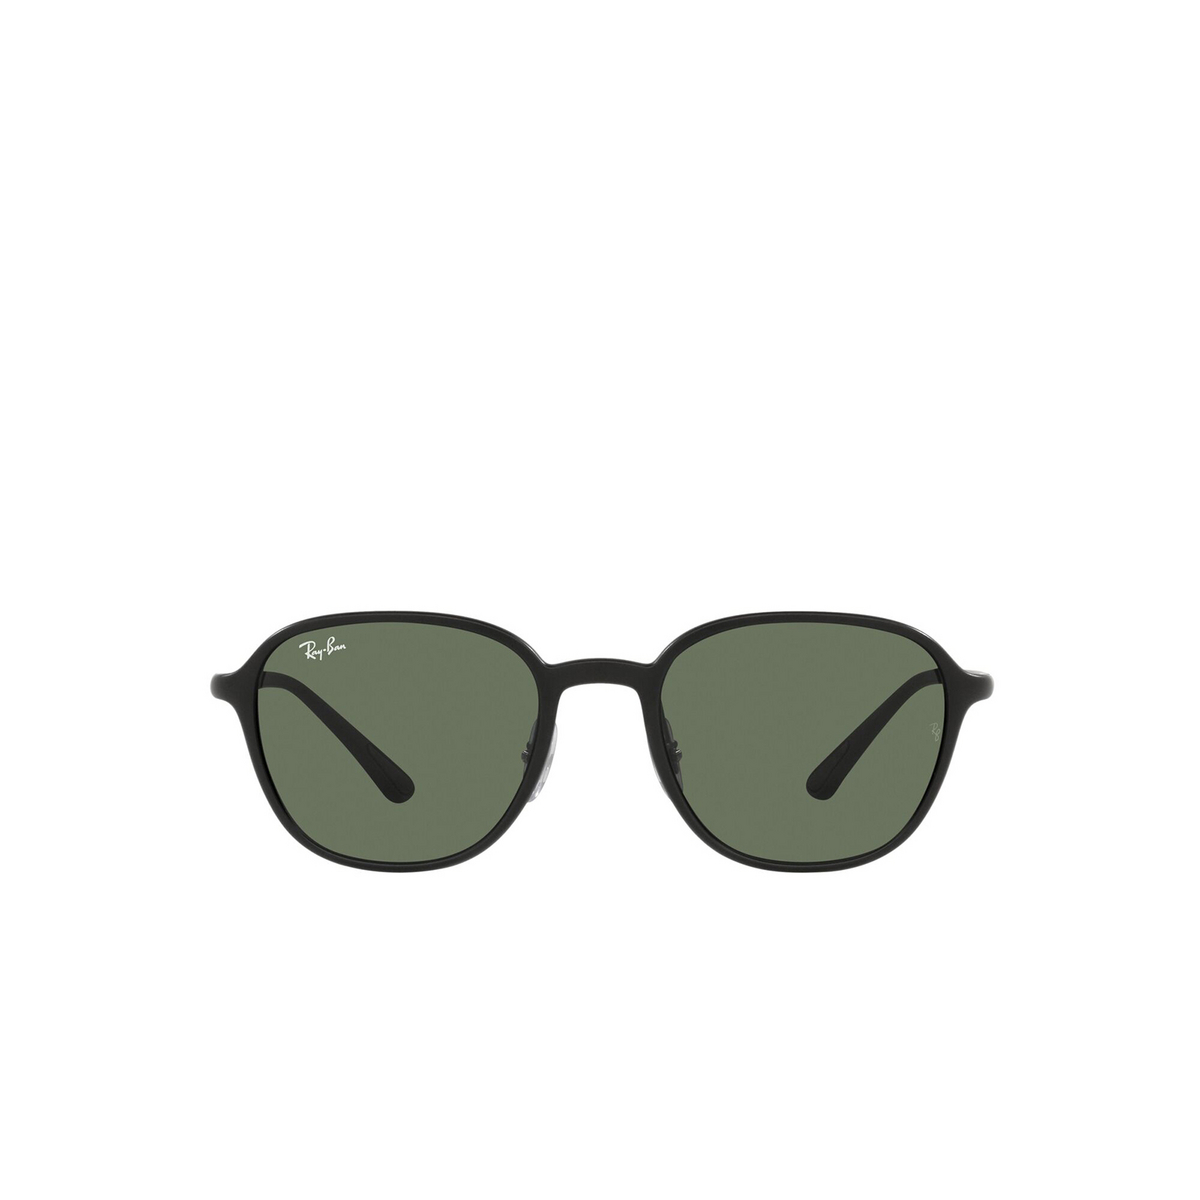 Ray-Ban® Square Sunglasses: RB4341 color Sanding Black 601S71 - front view.